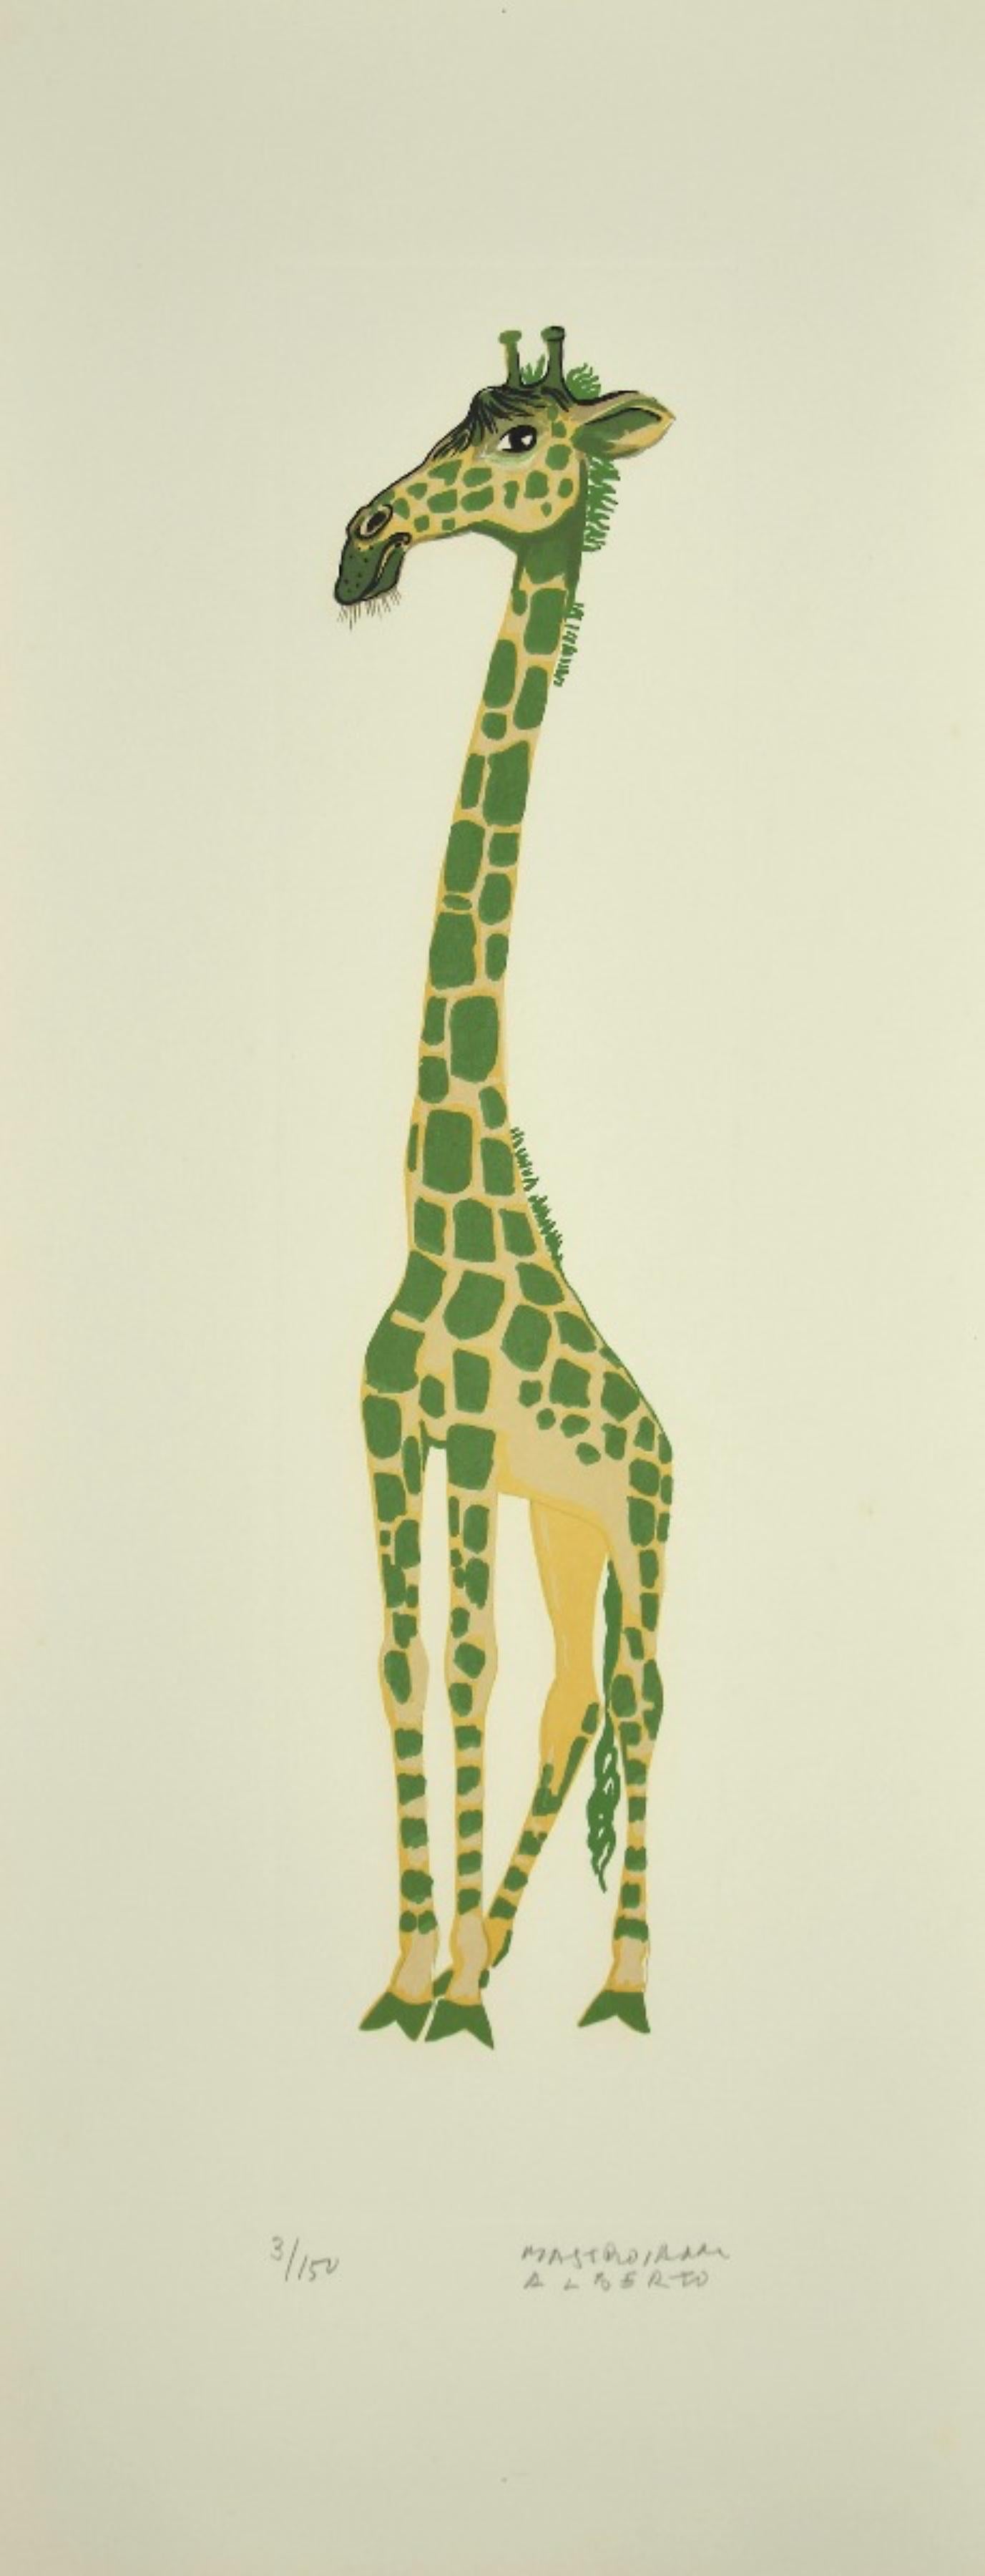 Girafe is a lithograph realized by Alberto Mastroianni in the 1970s.

Hand Signed on the lower right margin.

Numbered on the lower in pencil. Edition 3/150.

Good conditions, except for some folding along the margins.

The artwork represents an